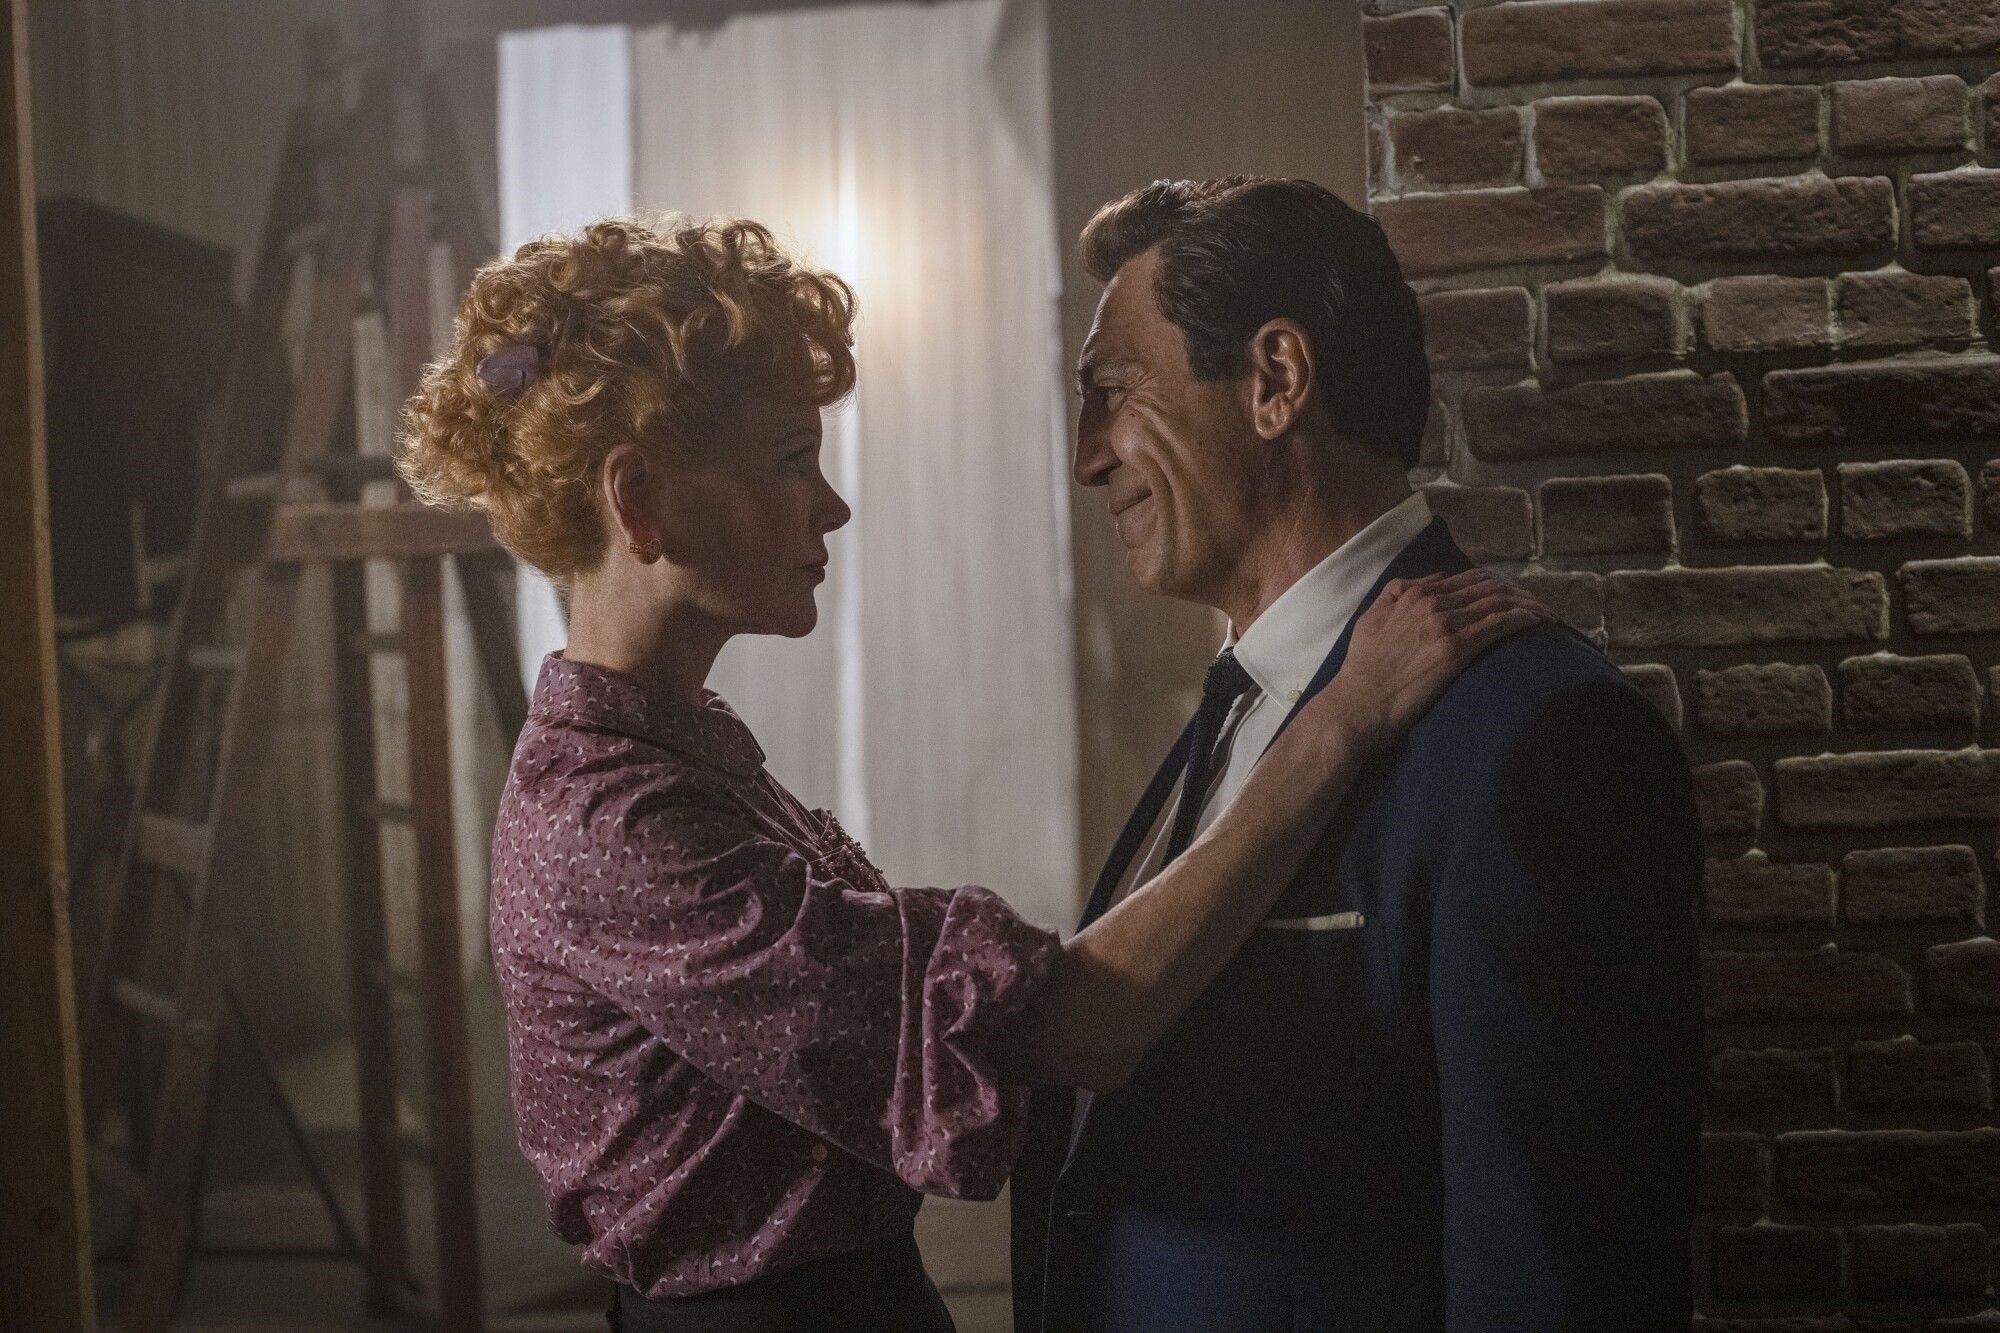 Nicole Kidman and Javier Bardem in the roles of Lucille Ball and Desi Arnaz, the well-remembered American television actors.  (Prime Video)